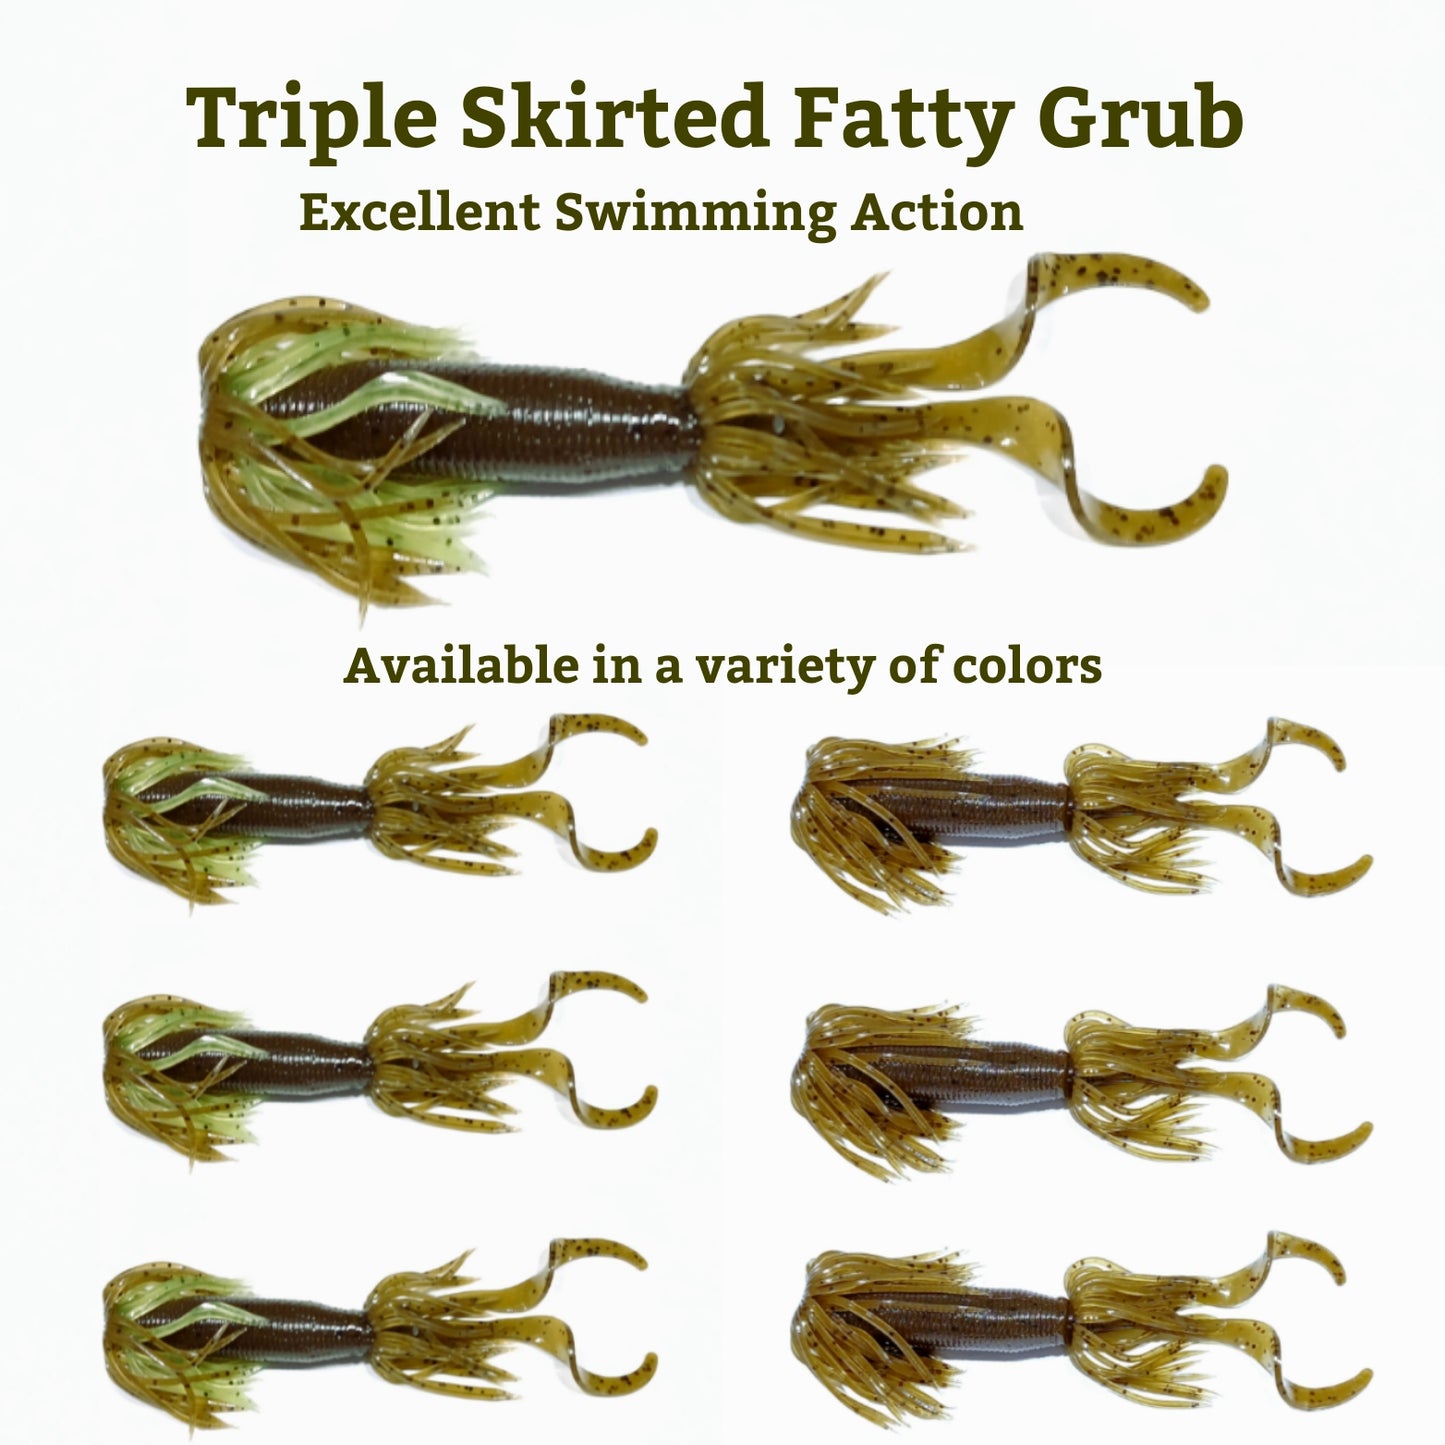 FATTY GRUB swimmer (triple skirt twin tail) variety of colors available